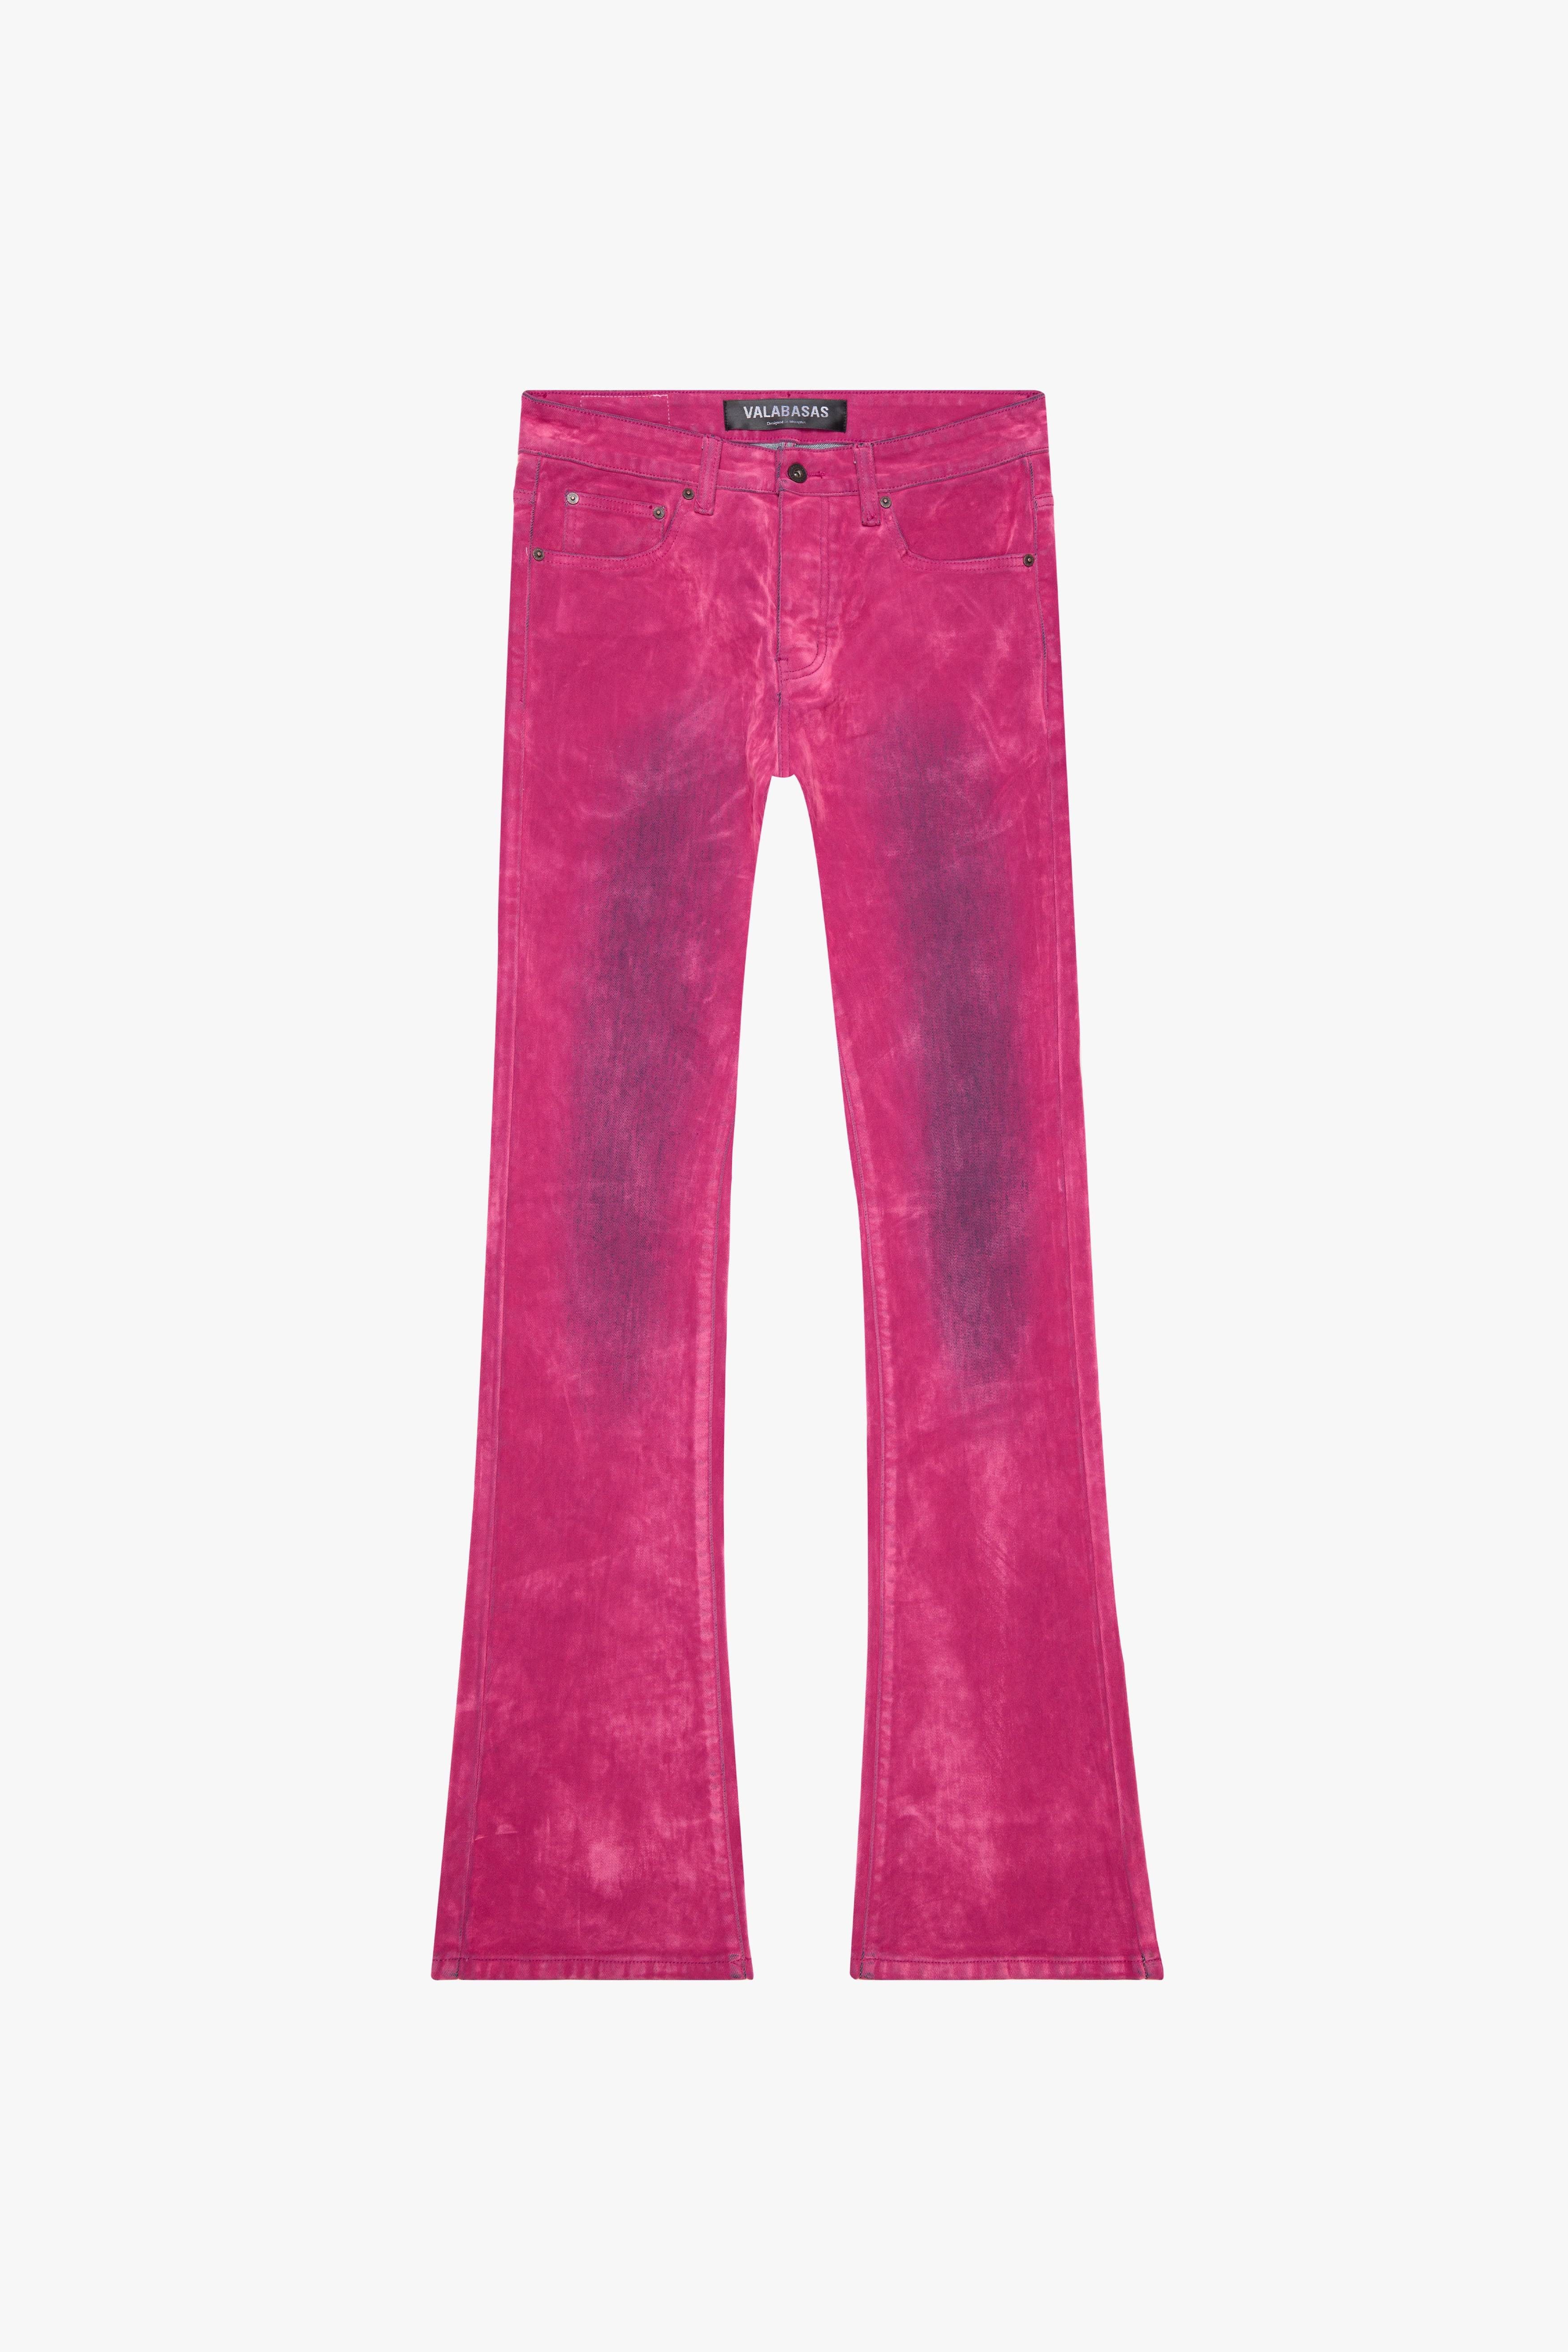 Luxurious Pink Suede Bell Bottom Jeans with Cotton-Spandex Blend | Image